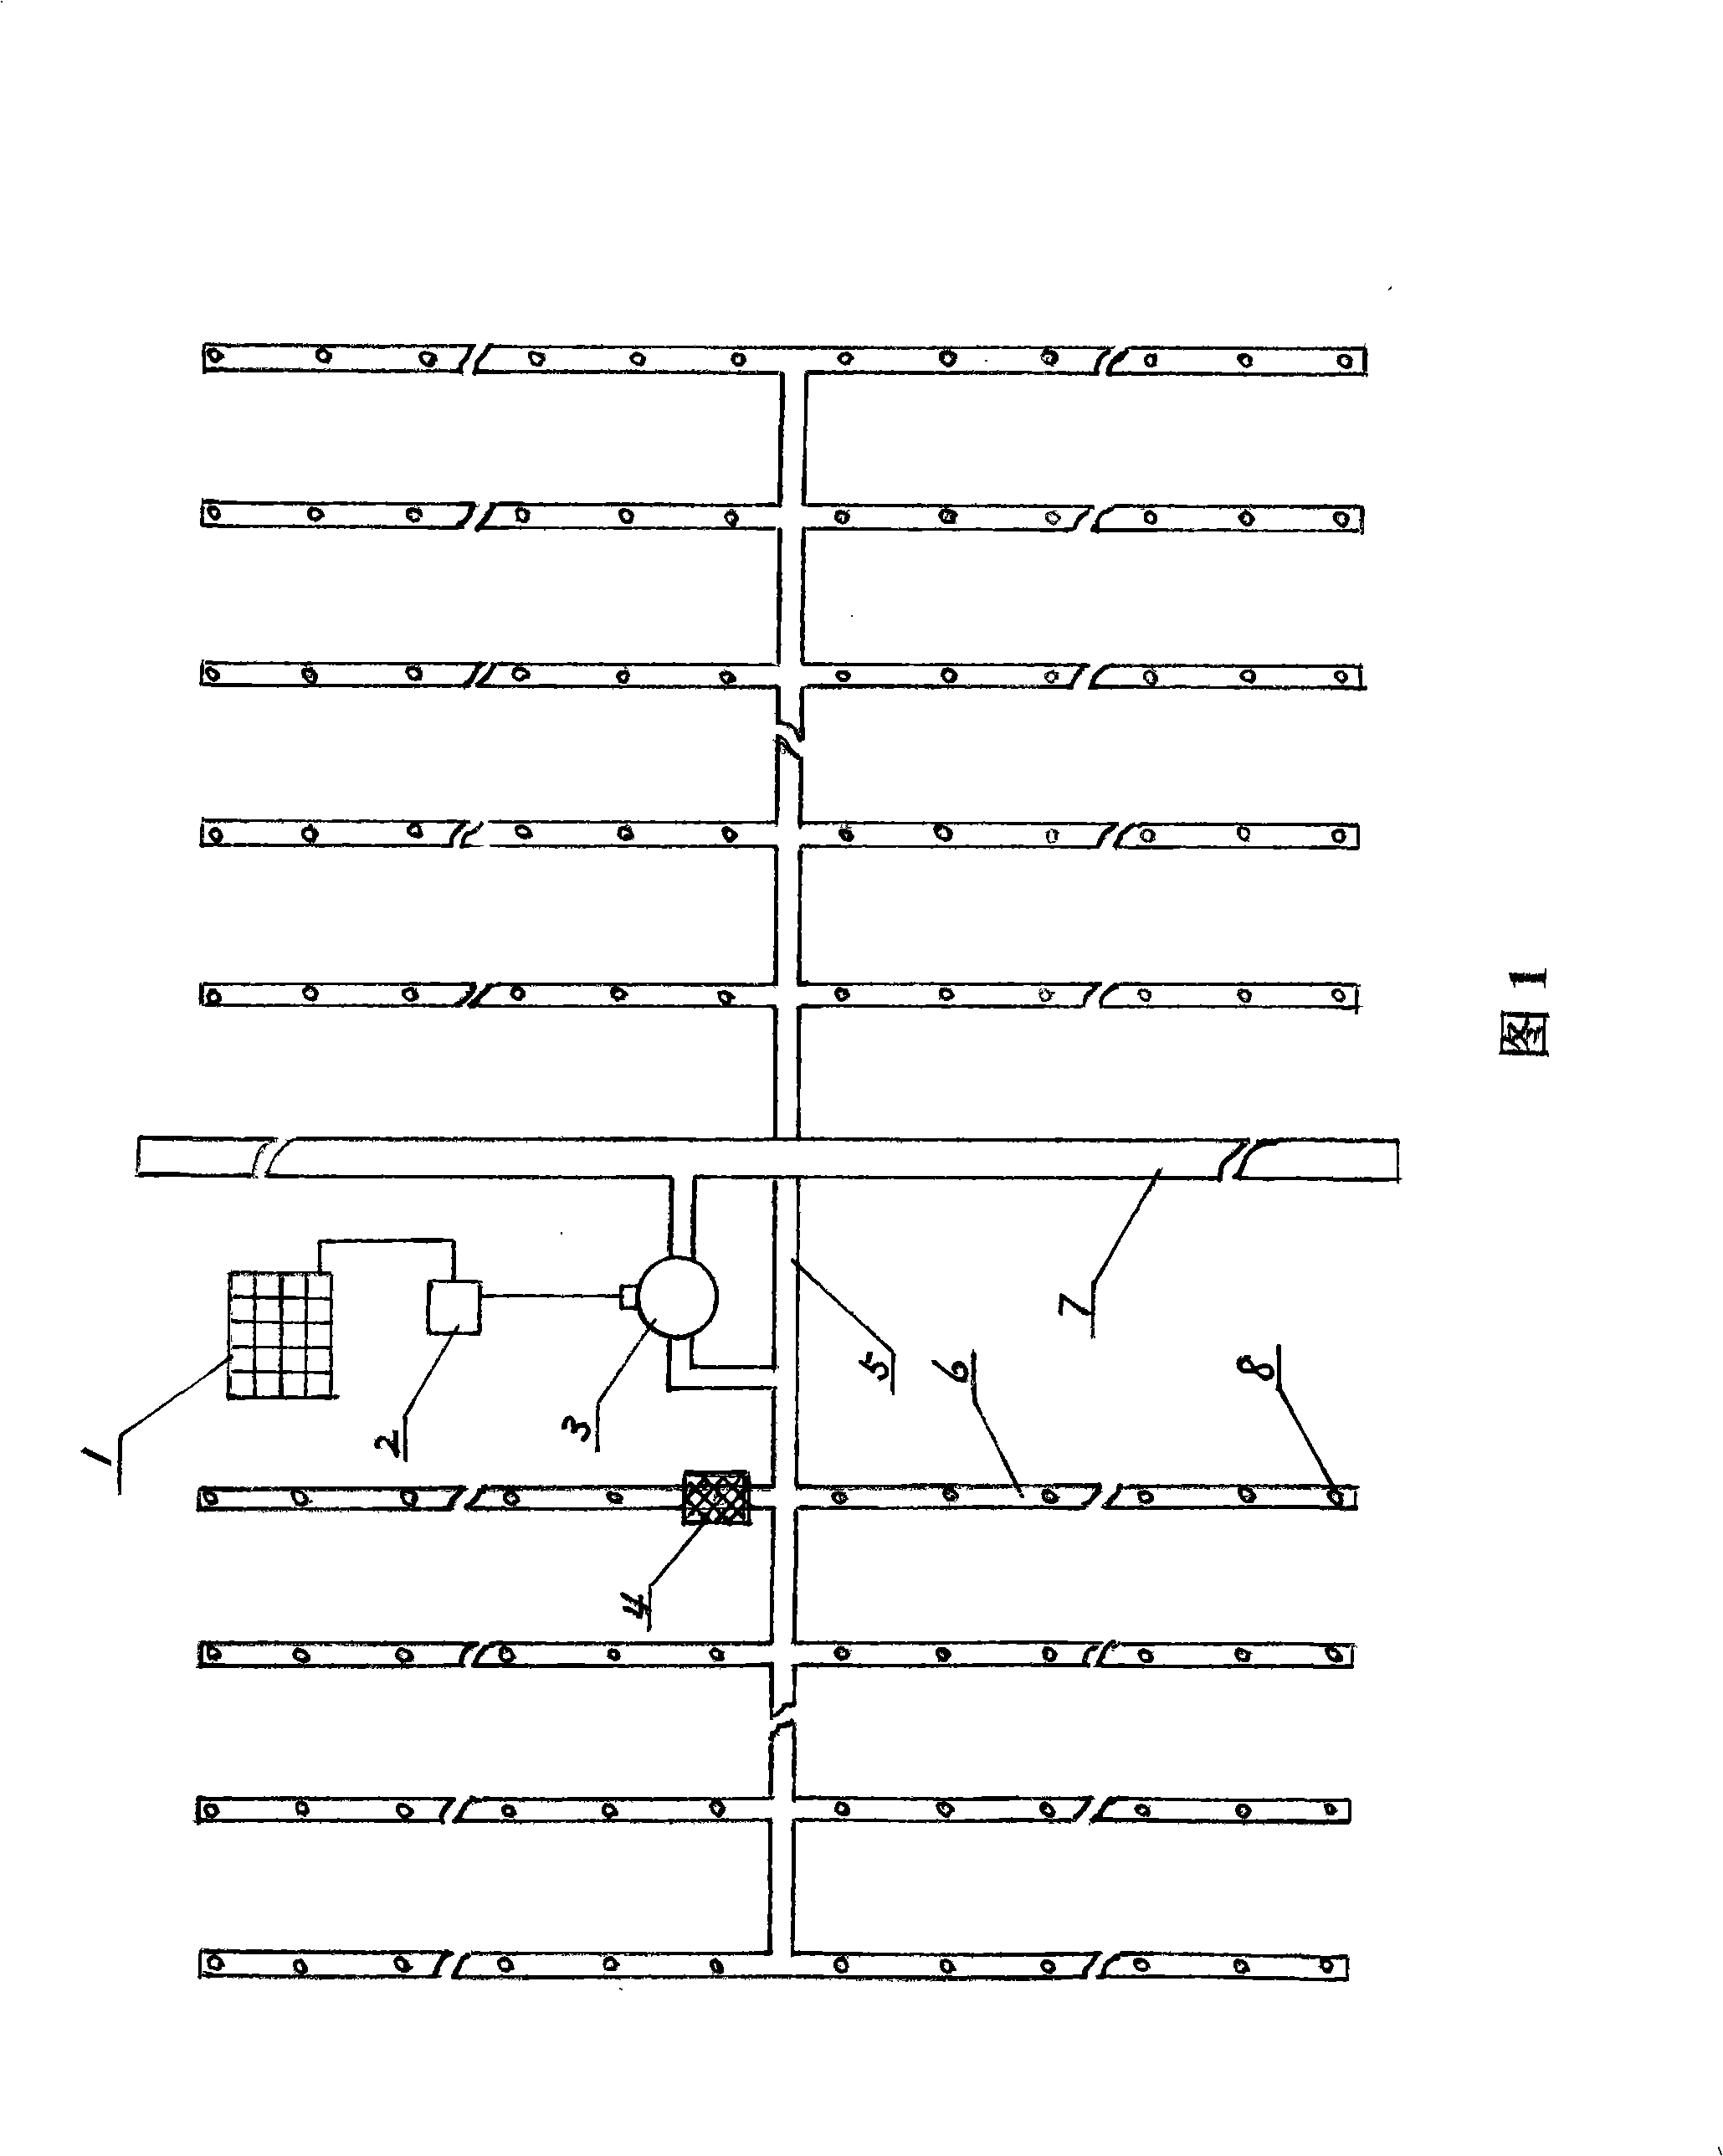 Drip irrigation device for treating sand with spraying film covered network and pulse pump